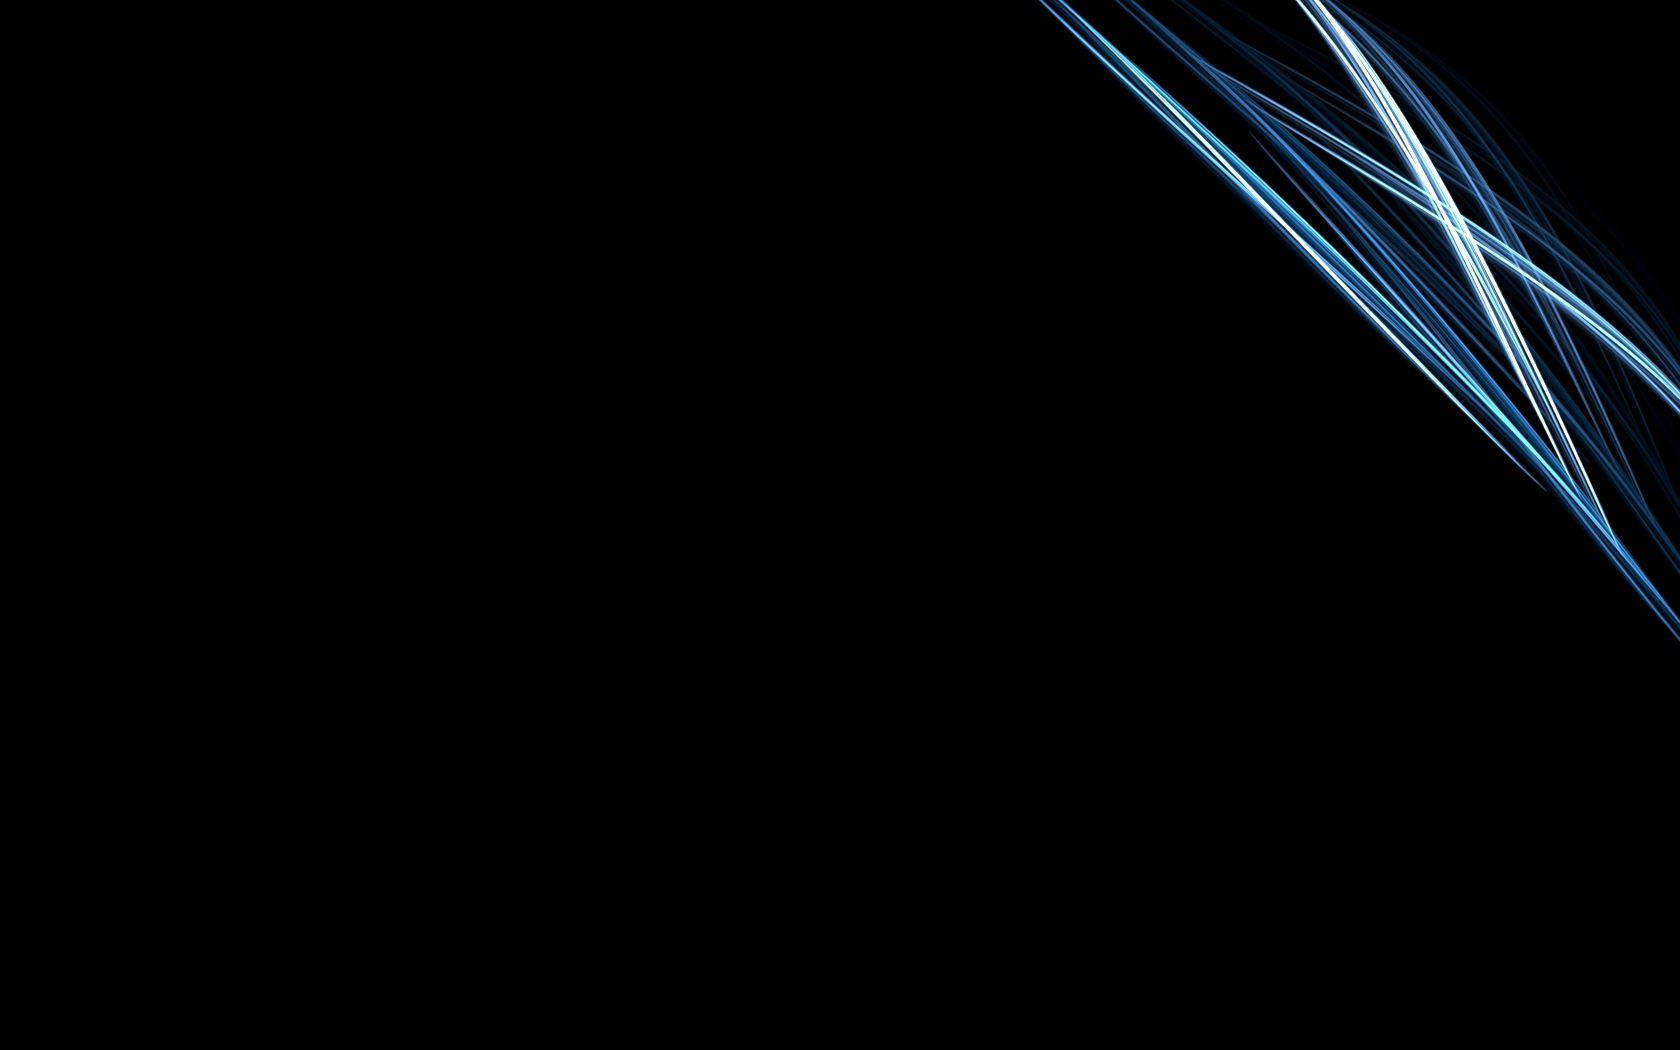 Blue, White and Silver Lines on a Black Background Wallpaper